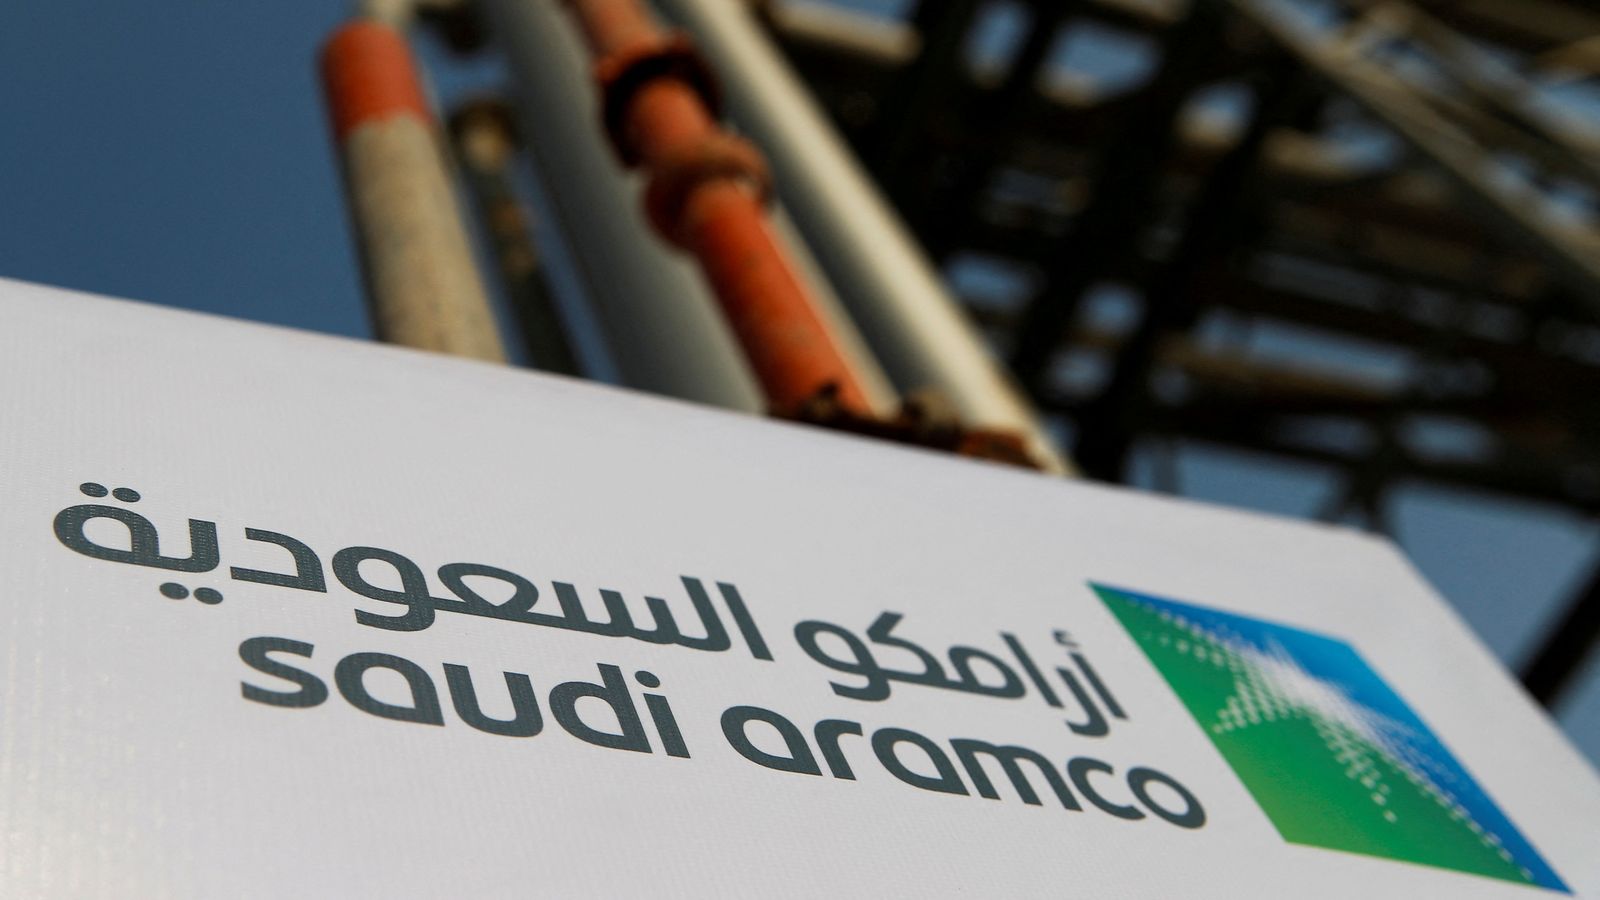 Top Saudi oil firm Aramco sees 90% surge in net profits for second quarter of 2022